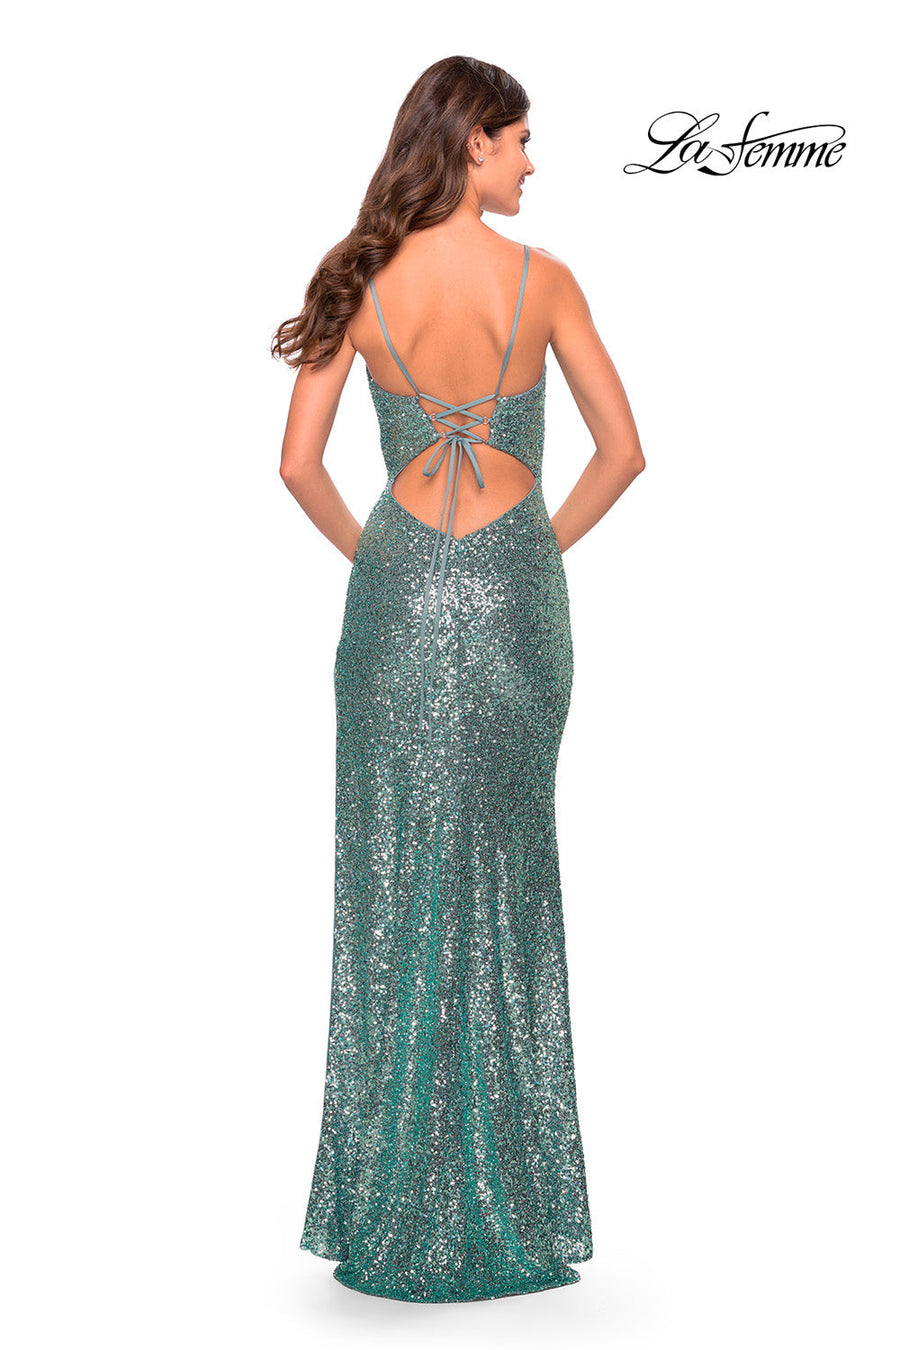 La Femme 31298 prom dress images.  La Femme 31298 is available in these colors: Mint, Neon Pink.